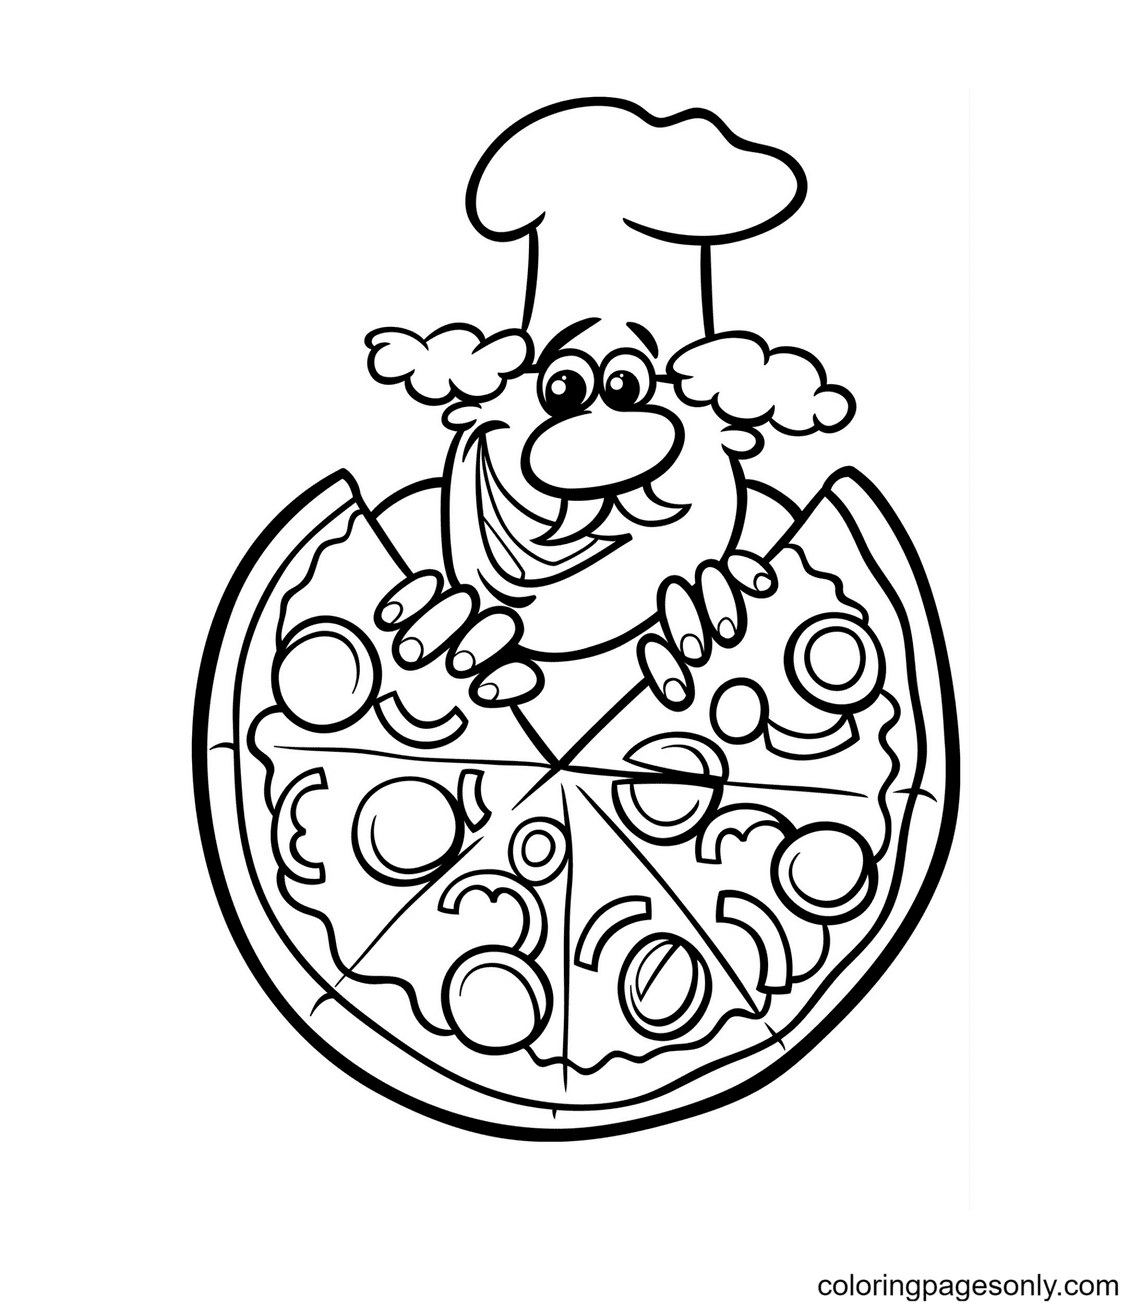 Pizza and Chef Coloring Pages